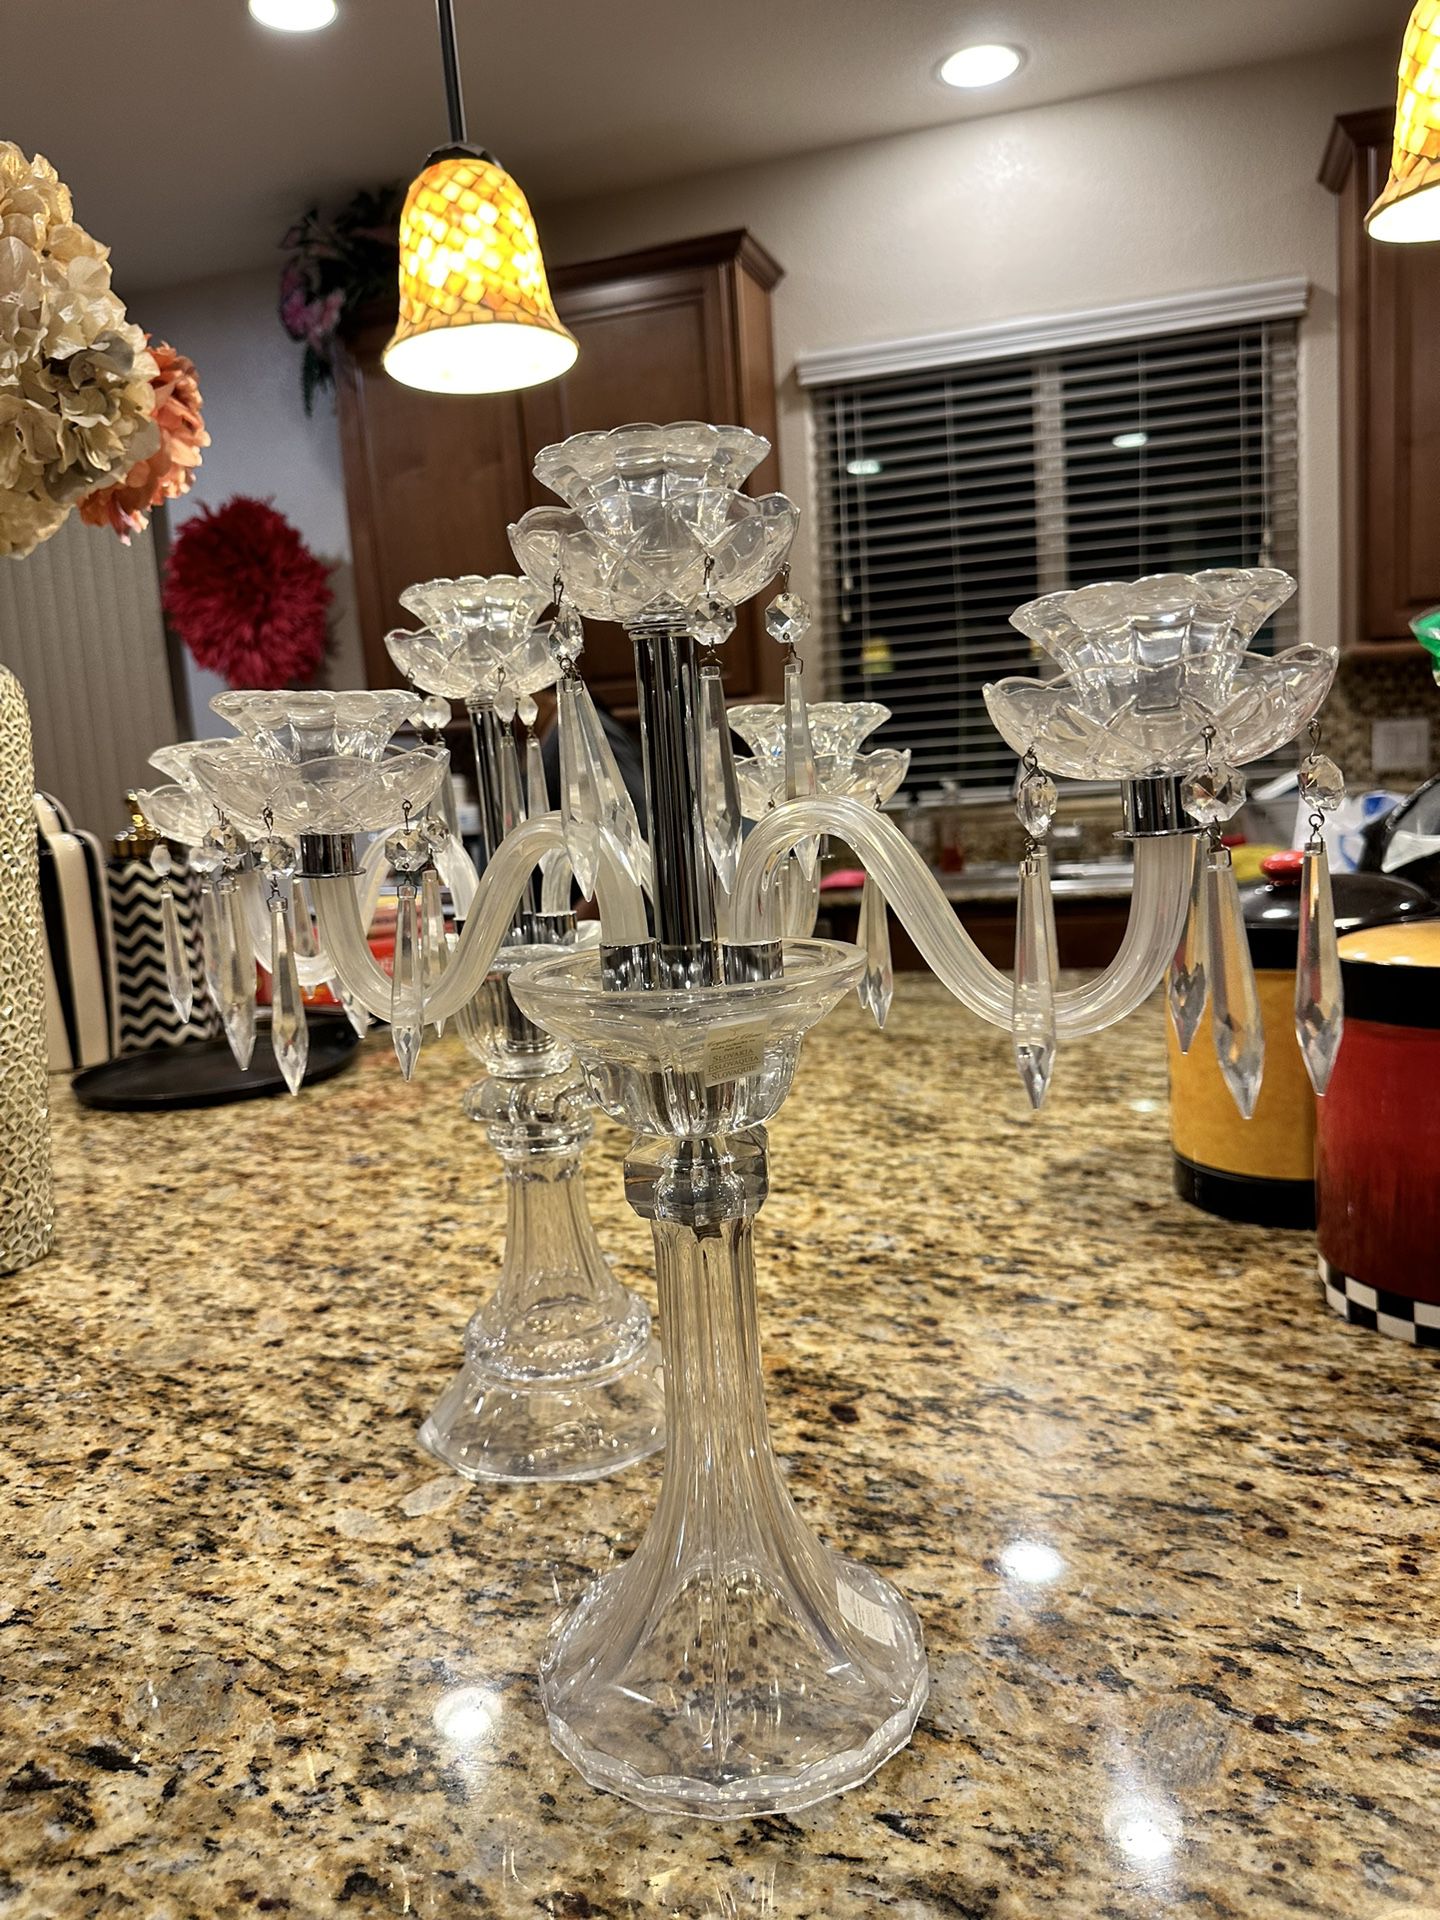 Crystal Candle Holder Decor (2 Piece)